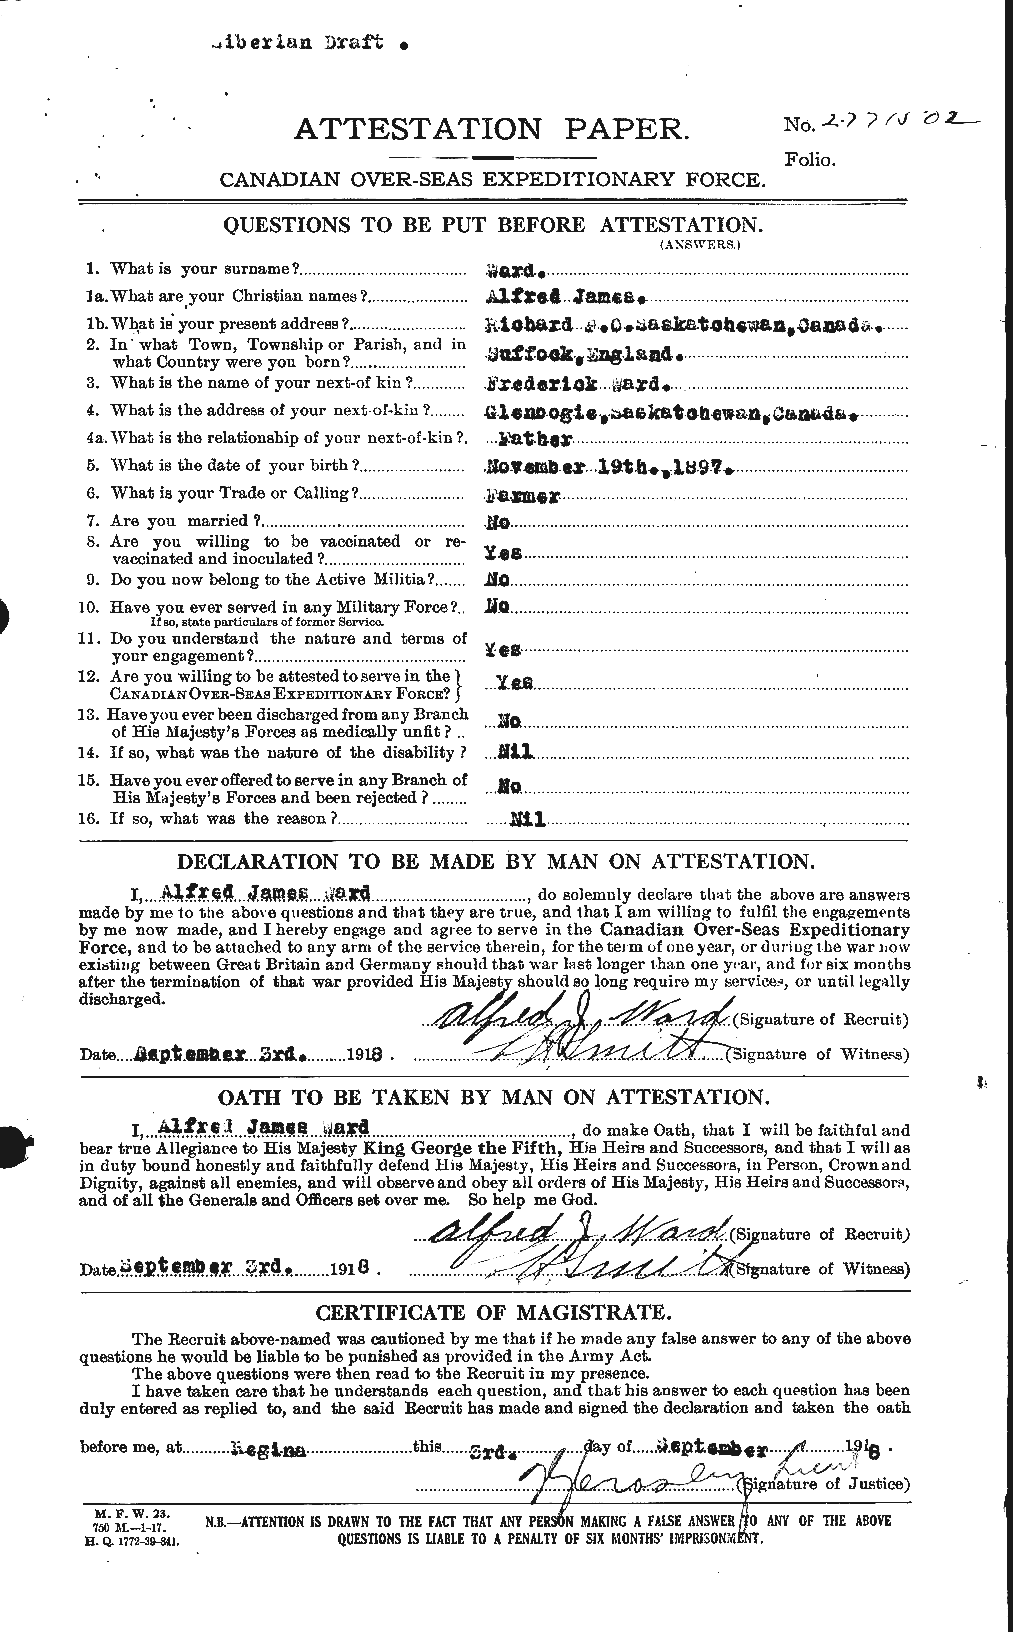 Personnel Records of the First World War - CEF 655123a